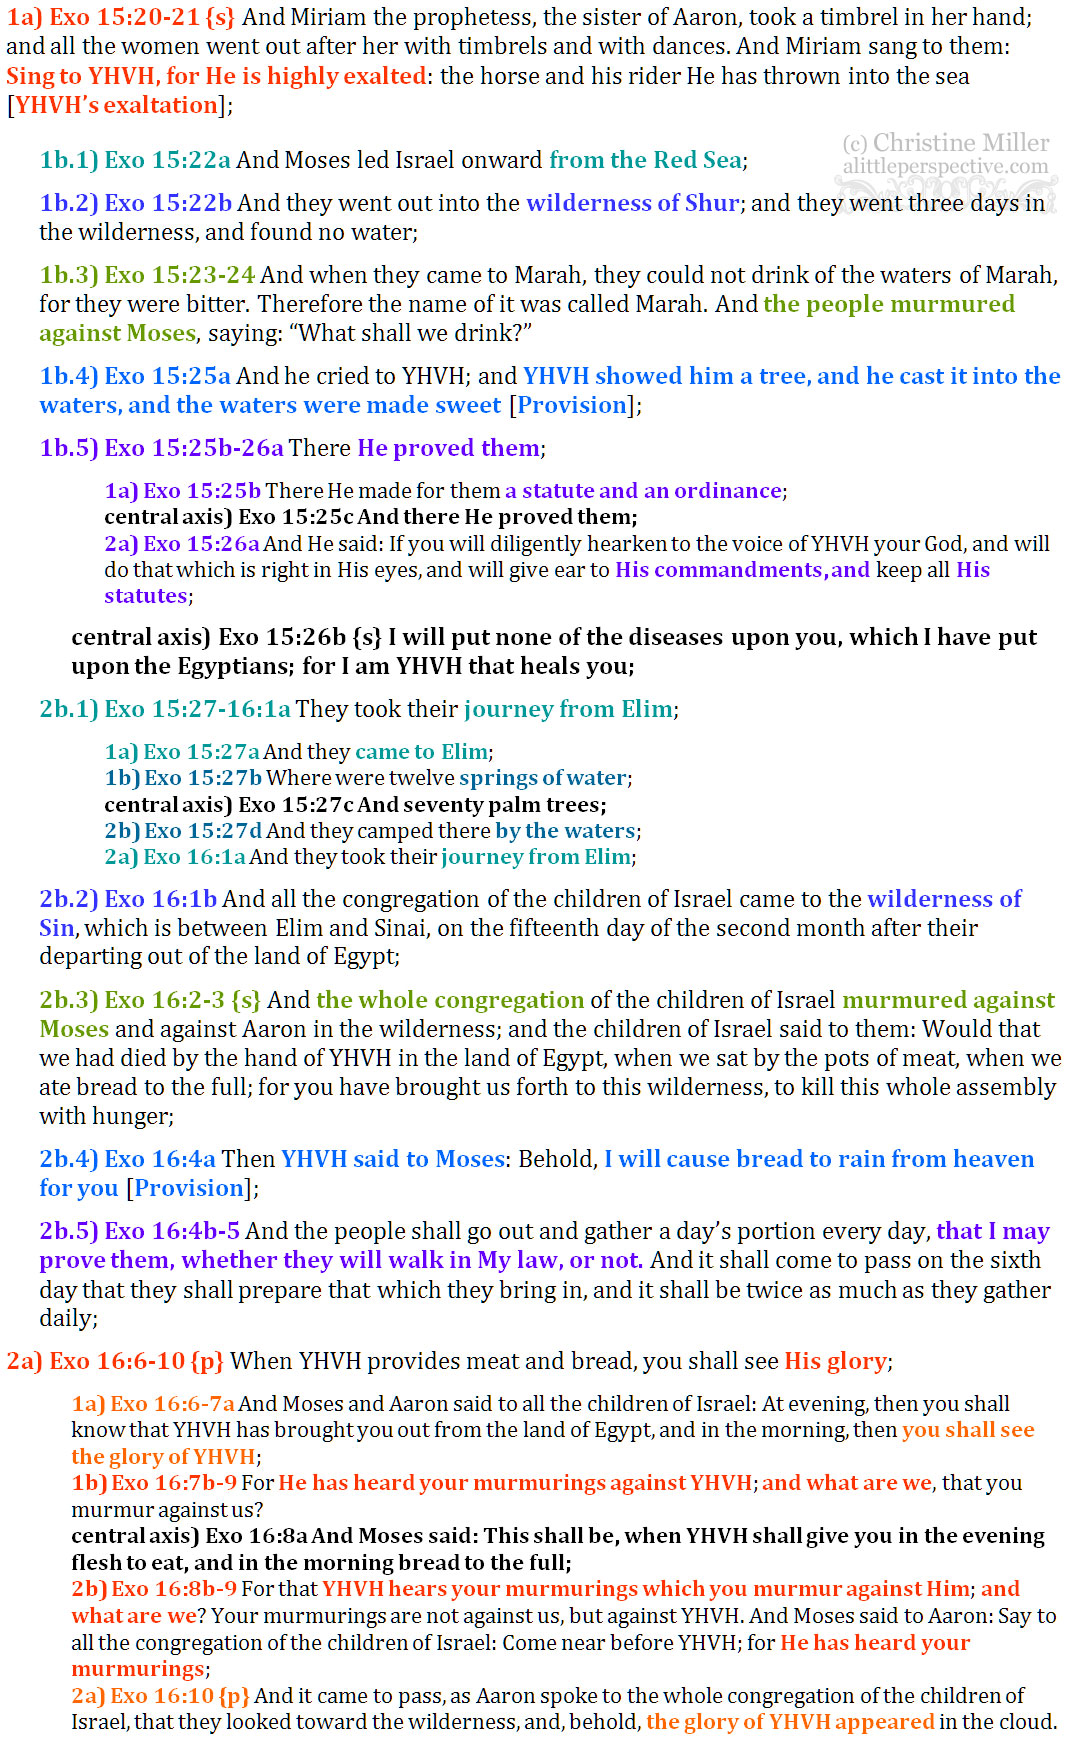 Exo 15:20-16:10 chiasm | christine's bible study at alittleperspective.com